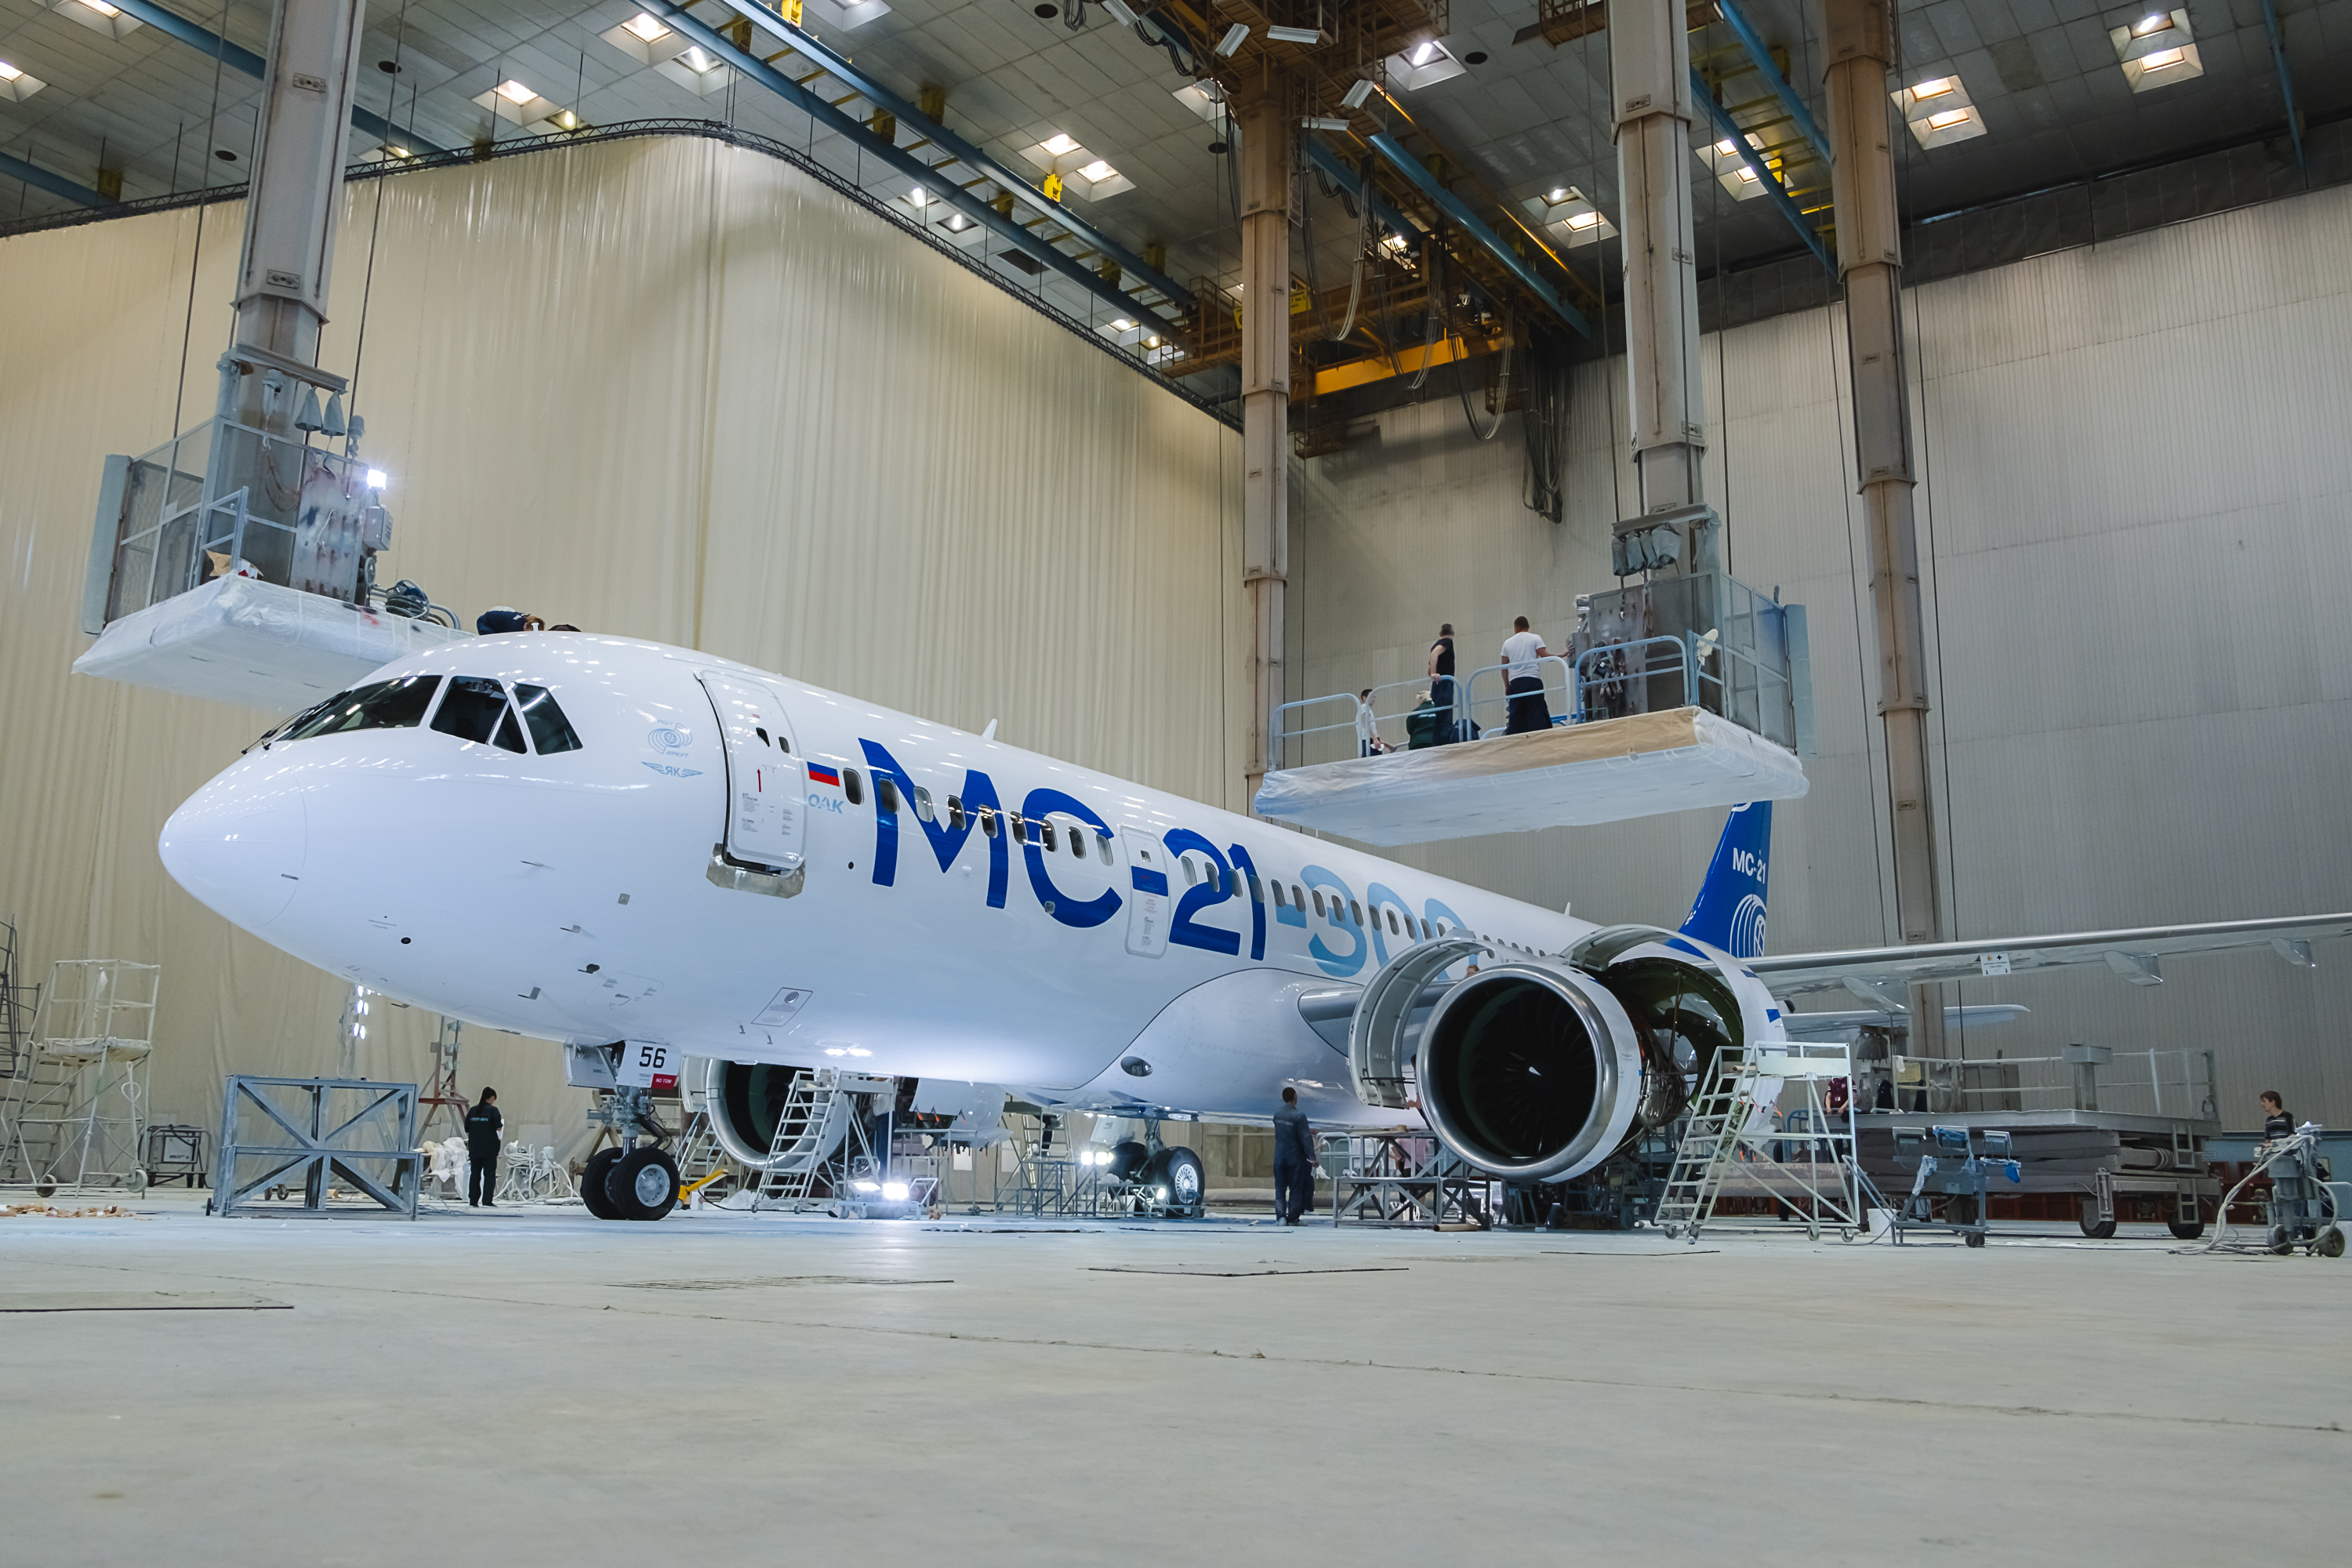 MC-21-300 prototype returns to testing after painting